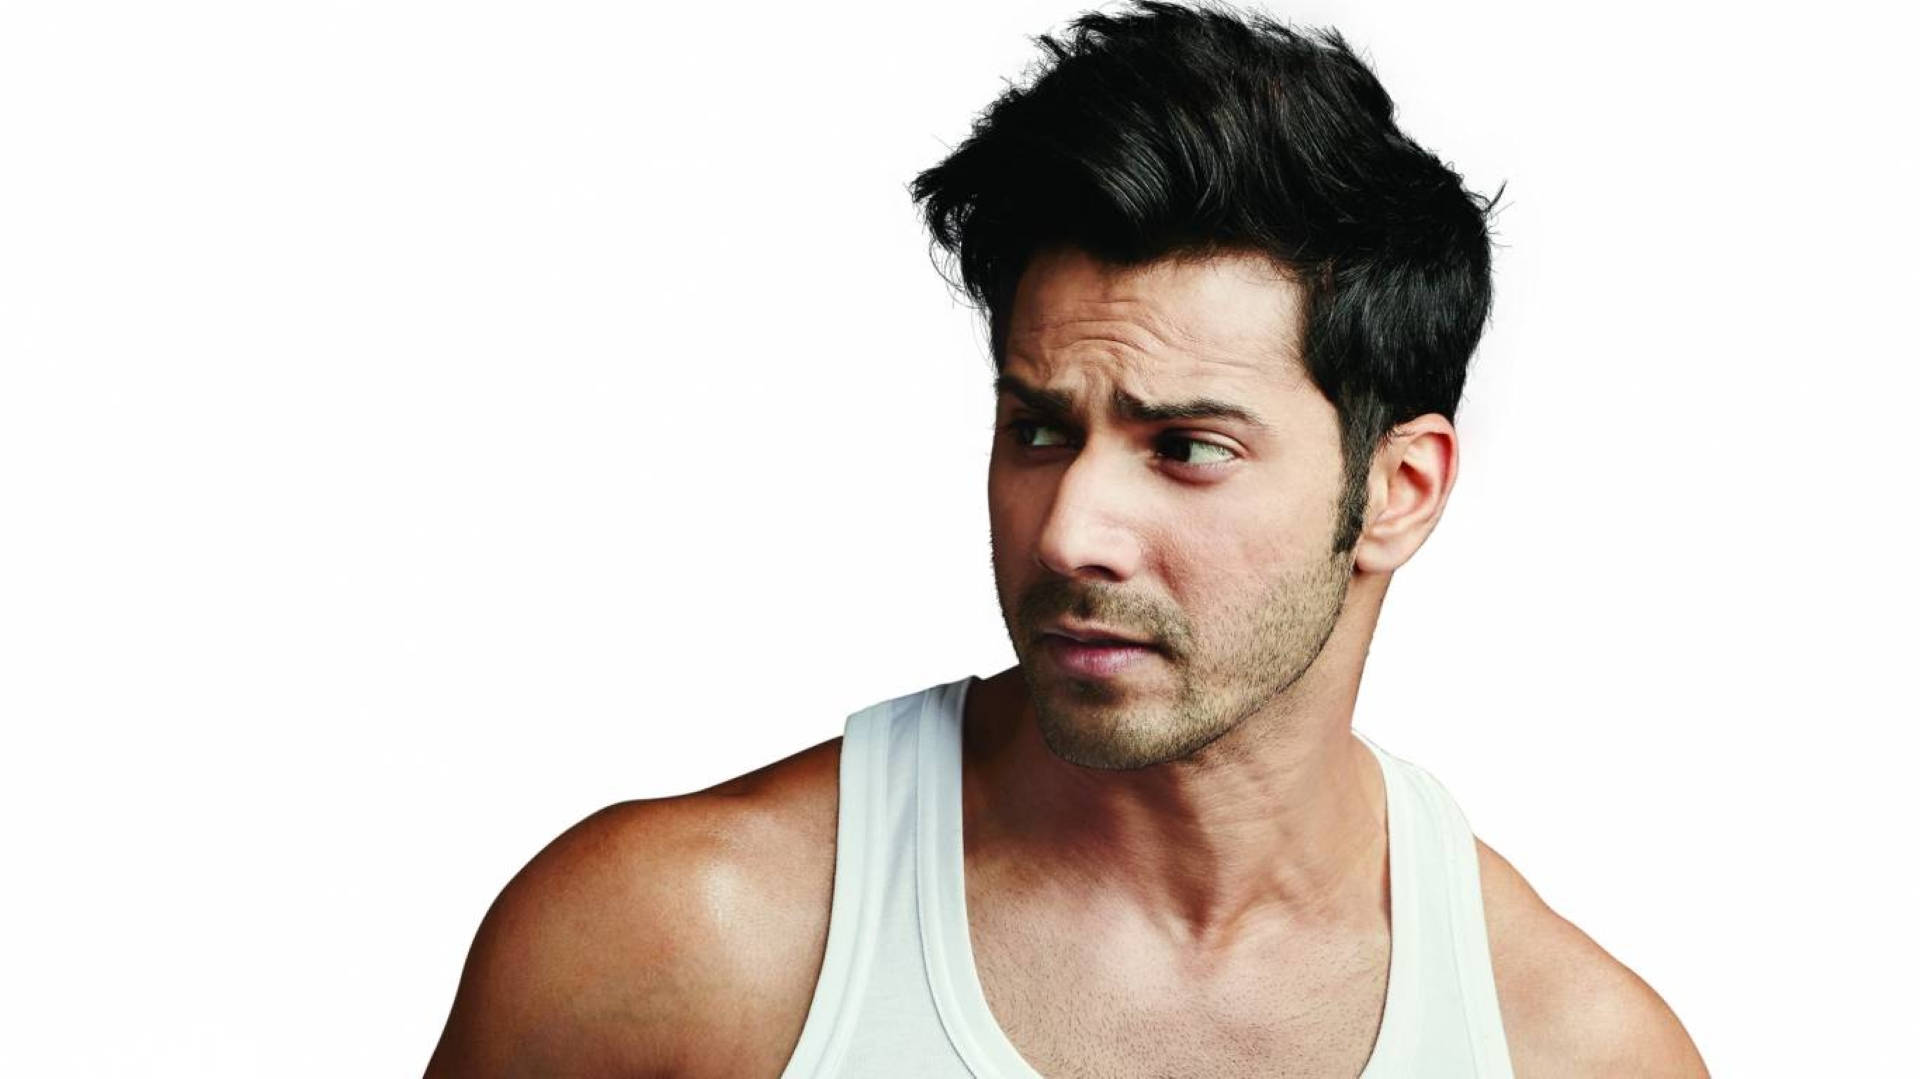 Varundhawan I Vit Tanktopp. (this Would Be A Description Of A Potential Computer Or Mobile Wallpaper Featuring The Indian Actor Varun Dhawan Wearing A White Tank Top.) Wallpaper